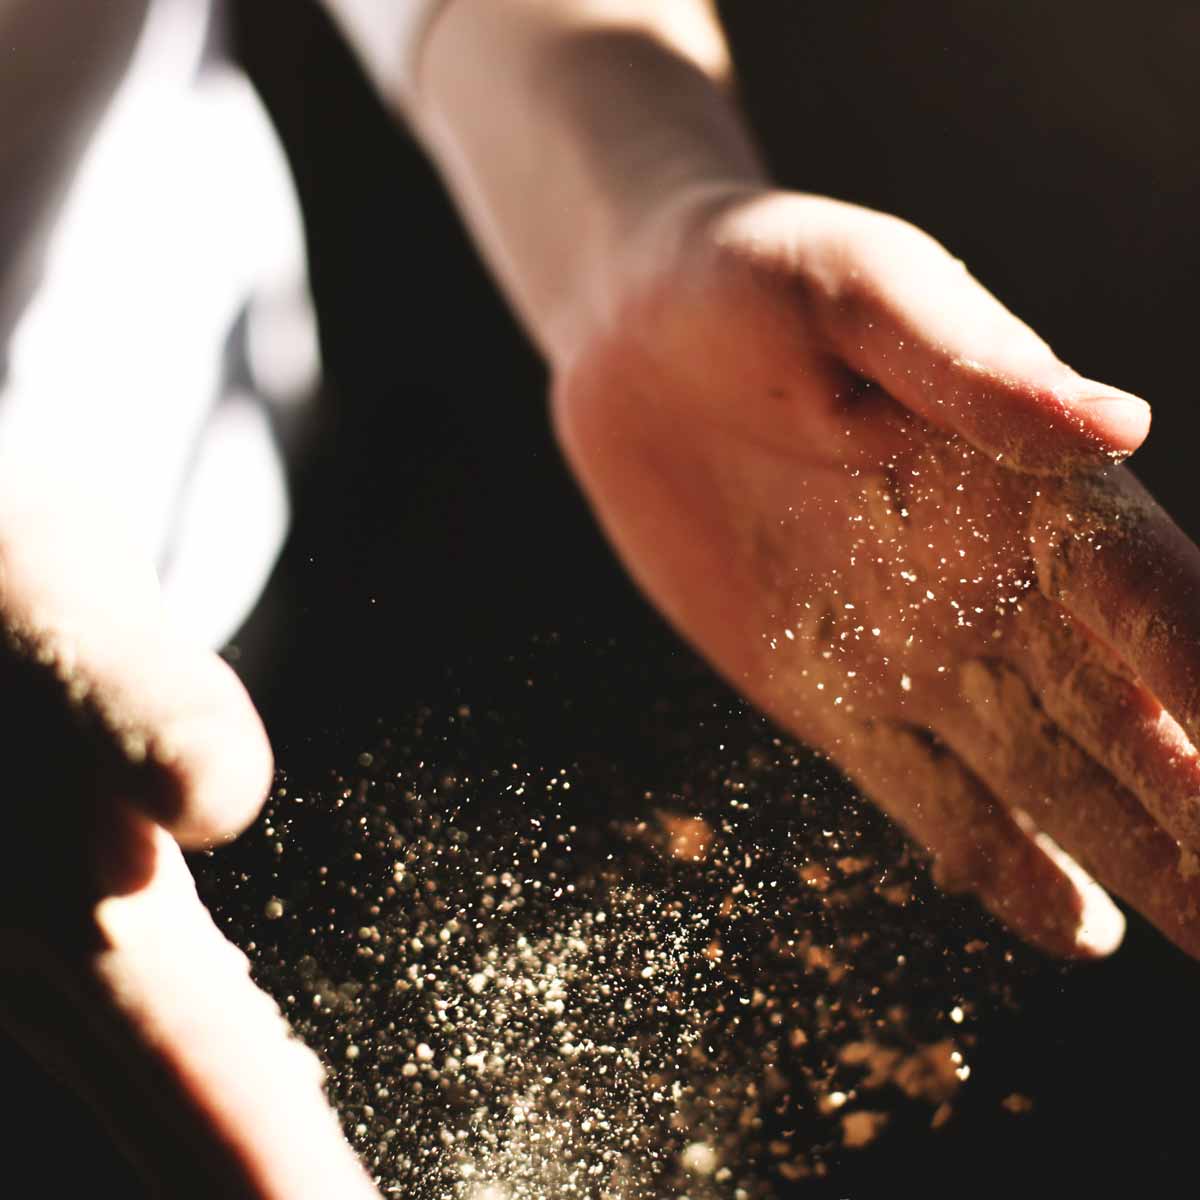 Close-up shot of chef's hands covered in flour making a pizza